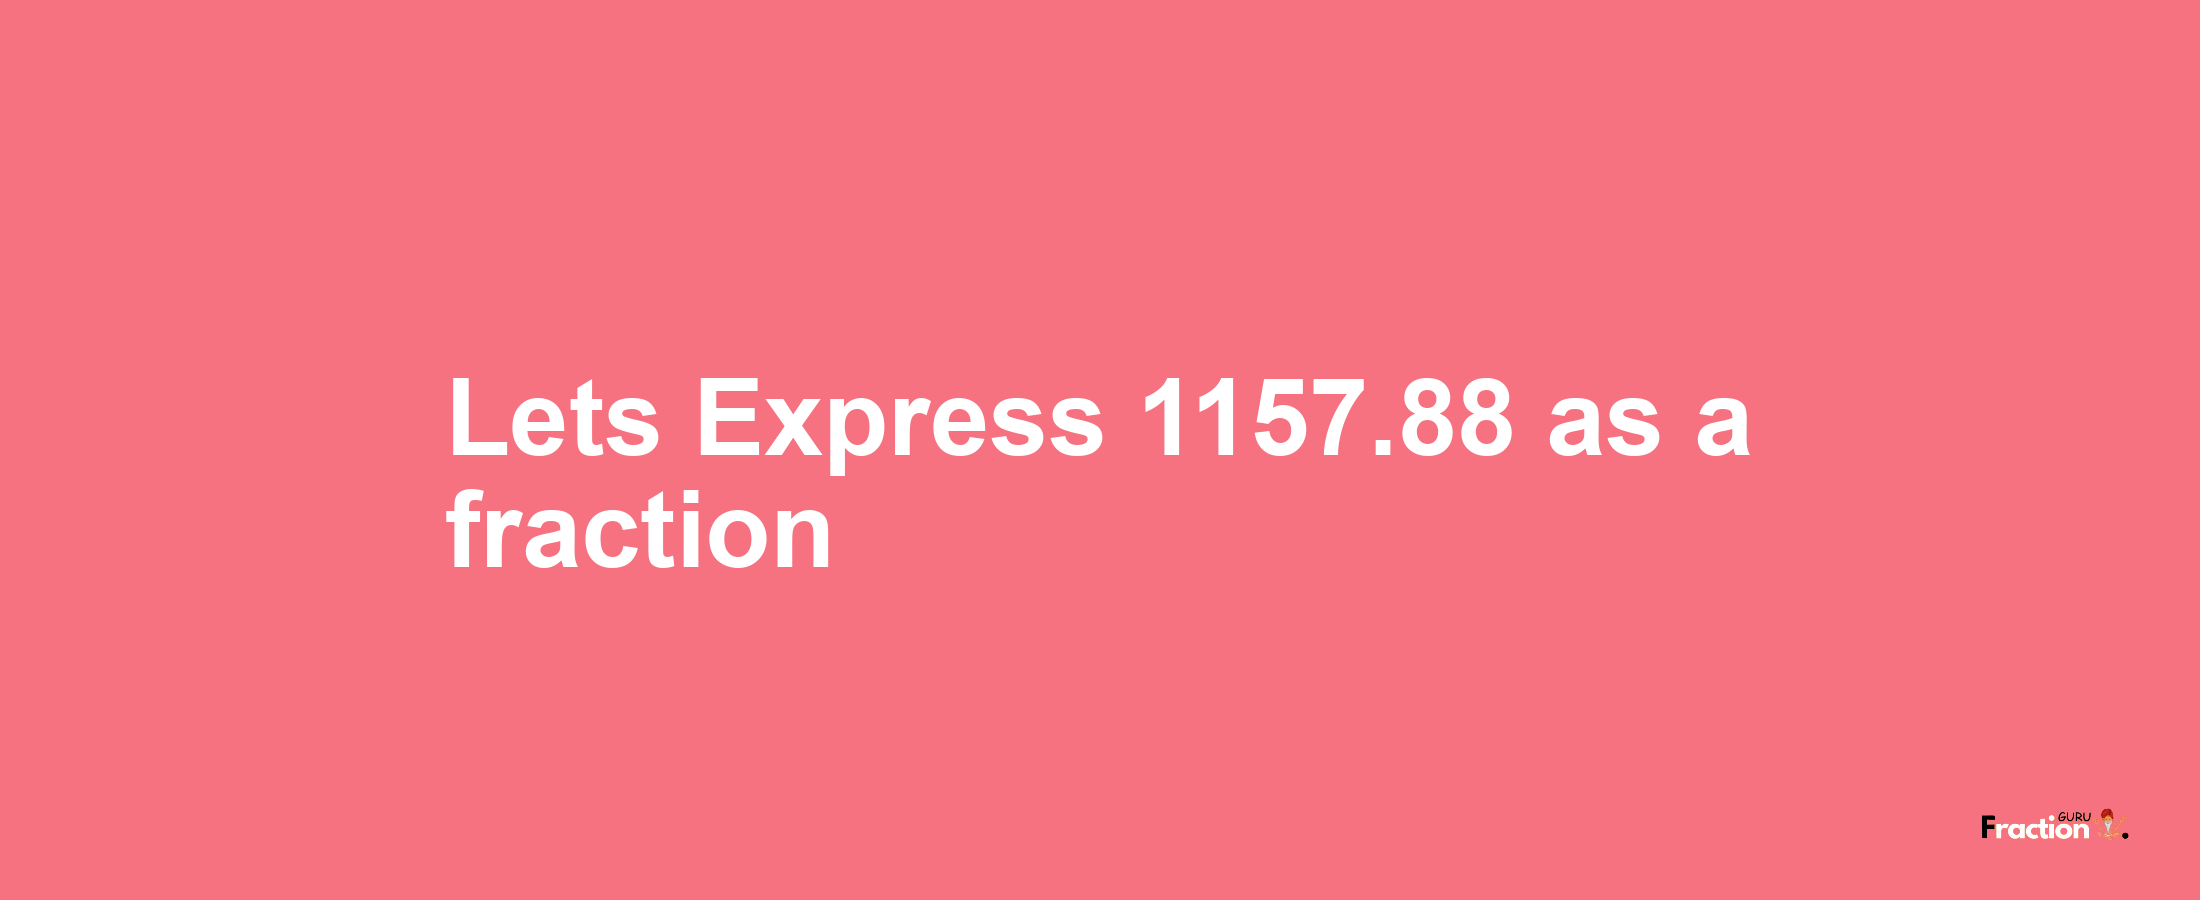 Lets Express 1157.88 as afraction